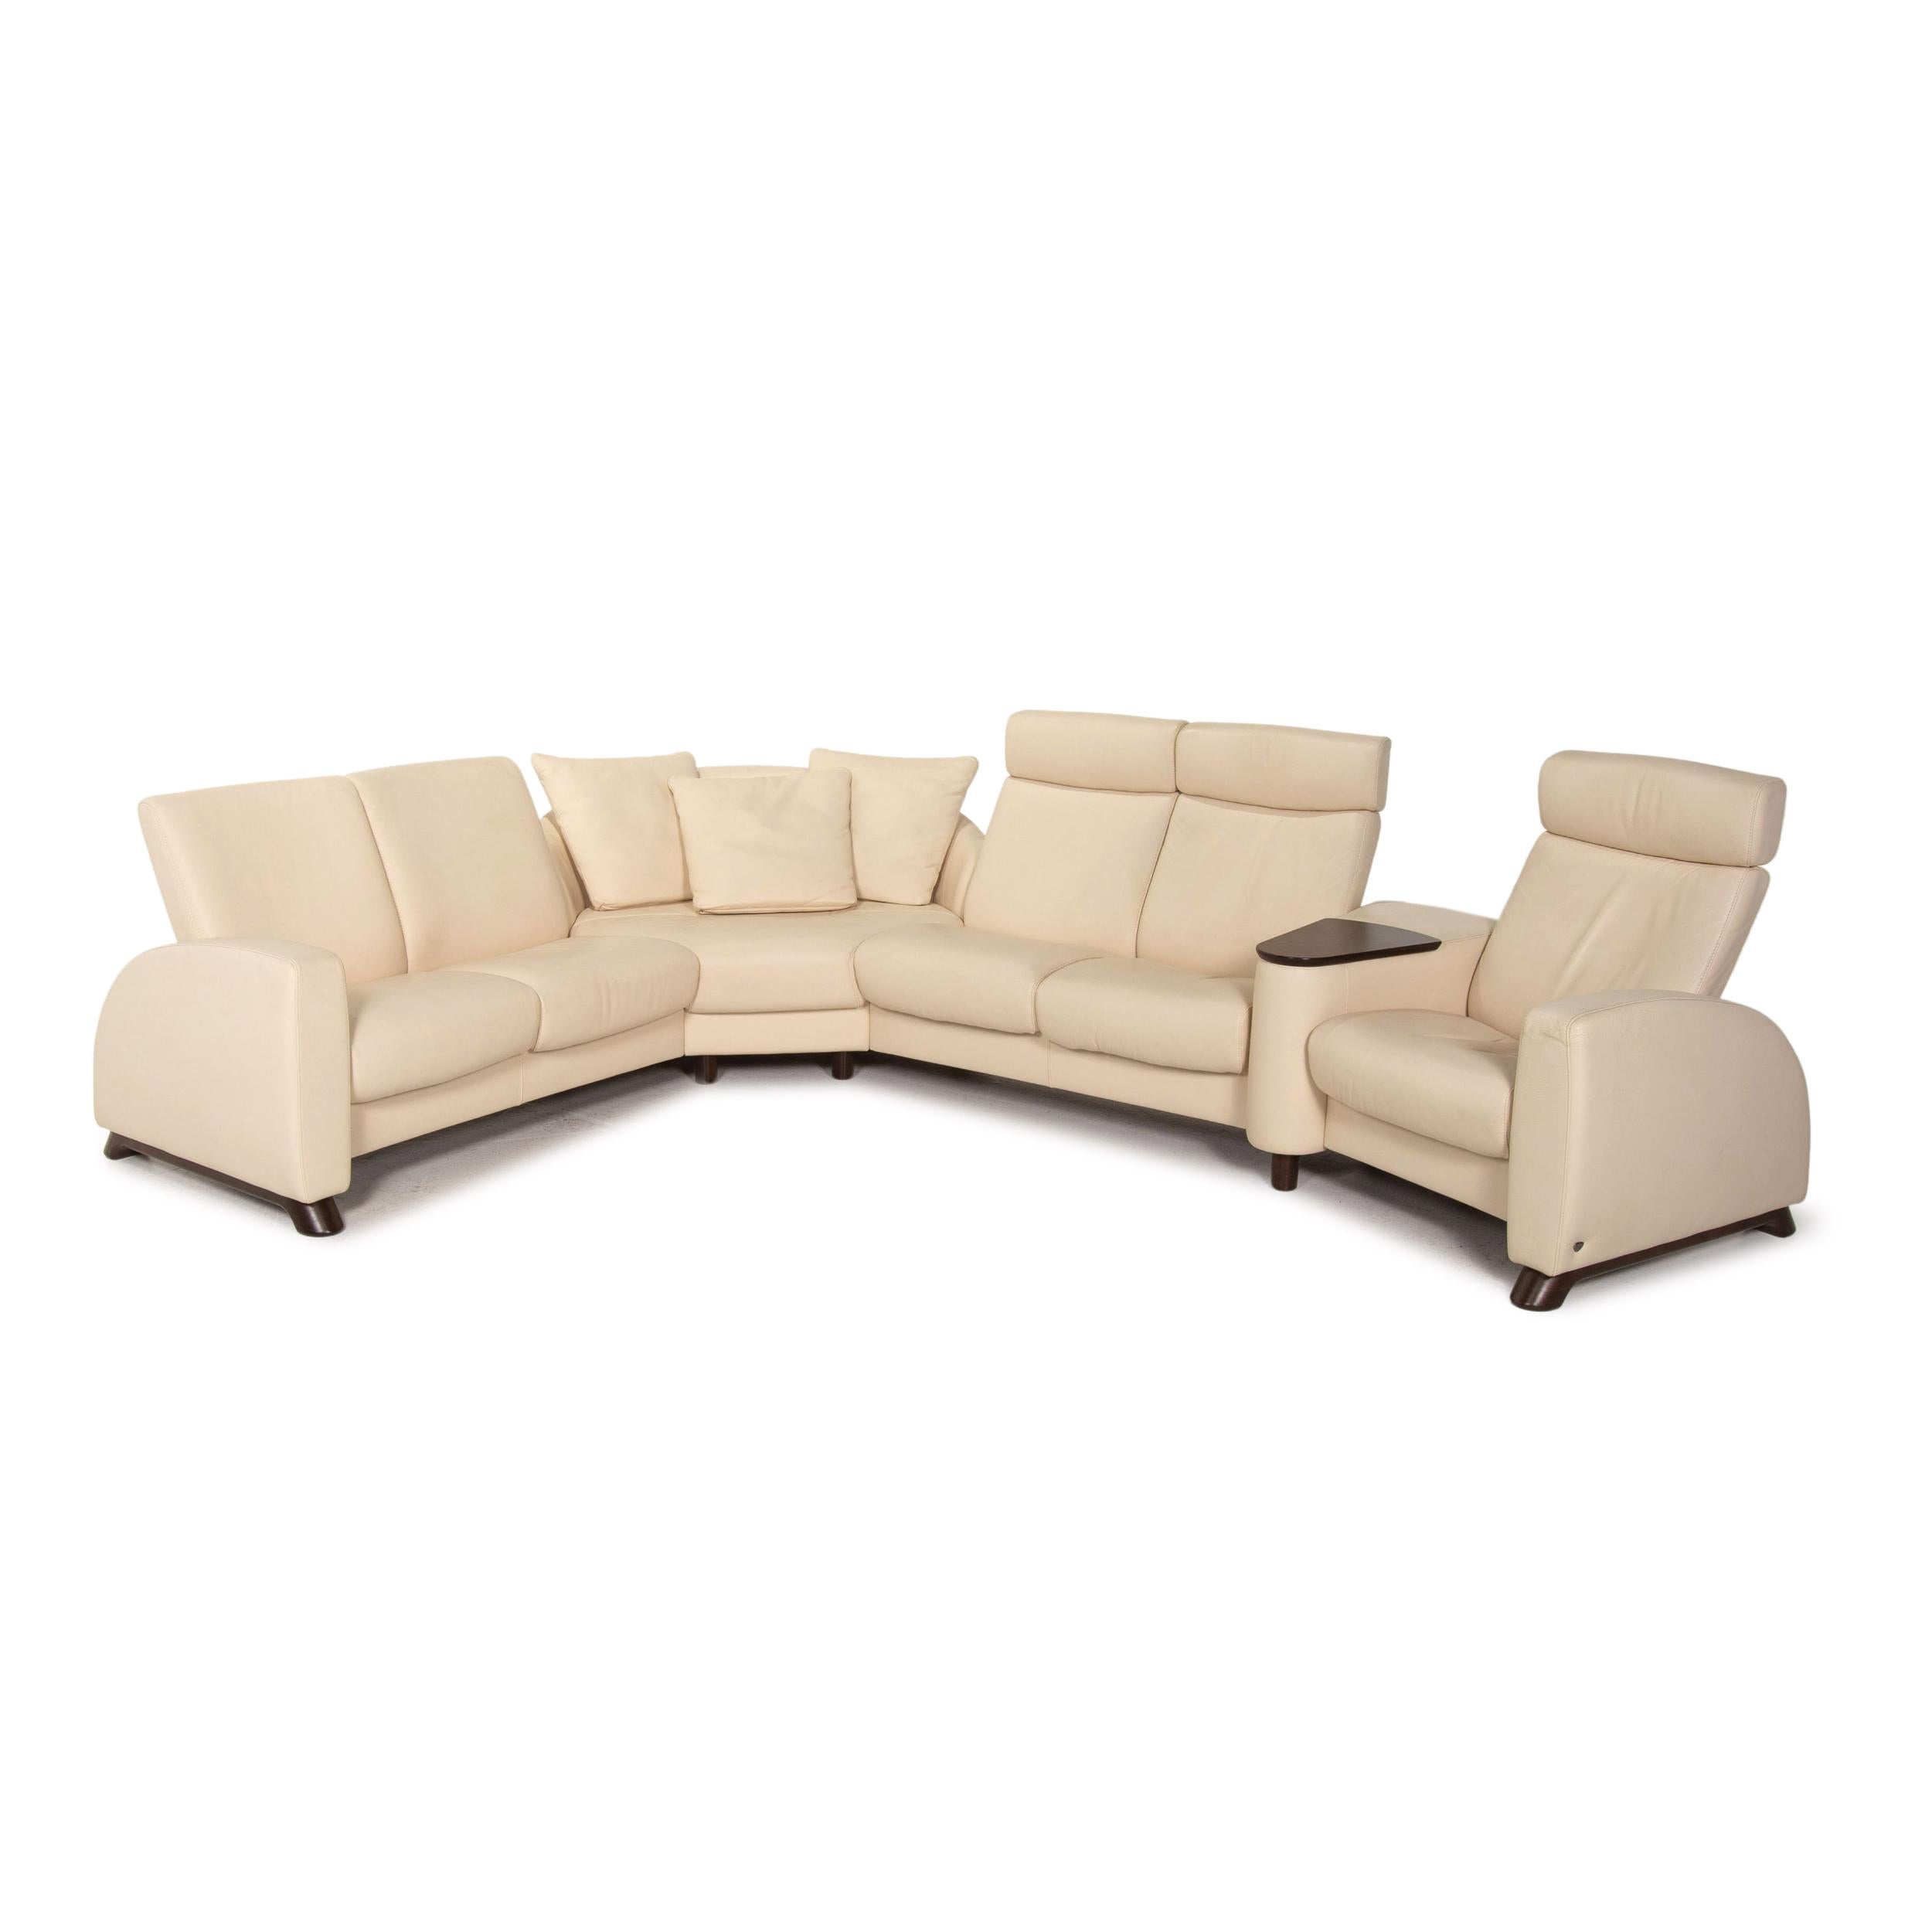 Stressless Arion Leather Corner Sofa Cream Relax Function Sofa Couch For Sale 1